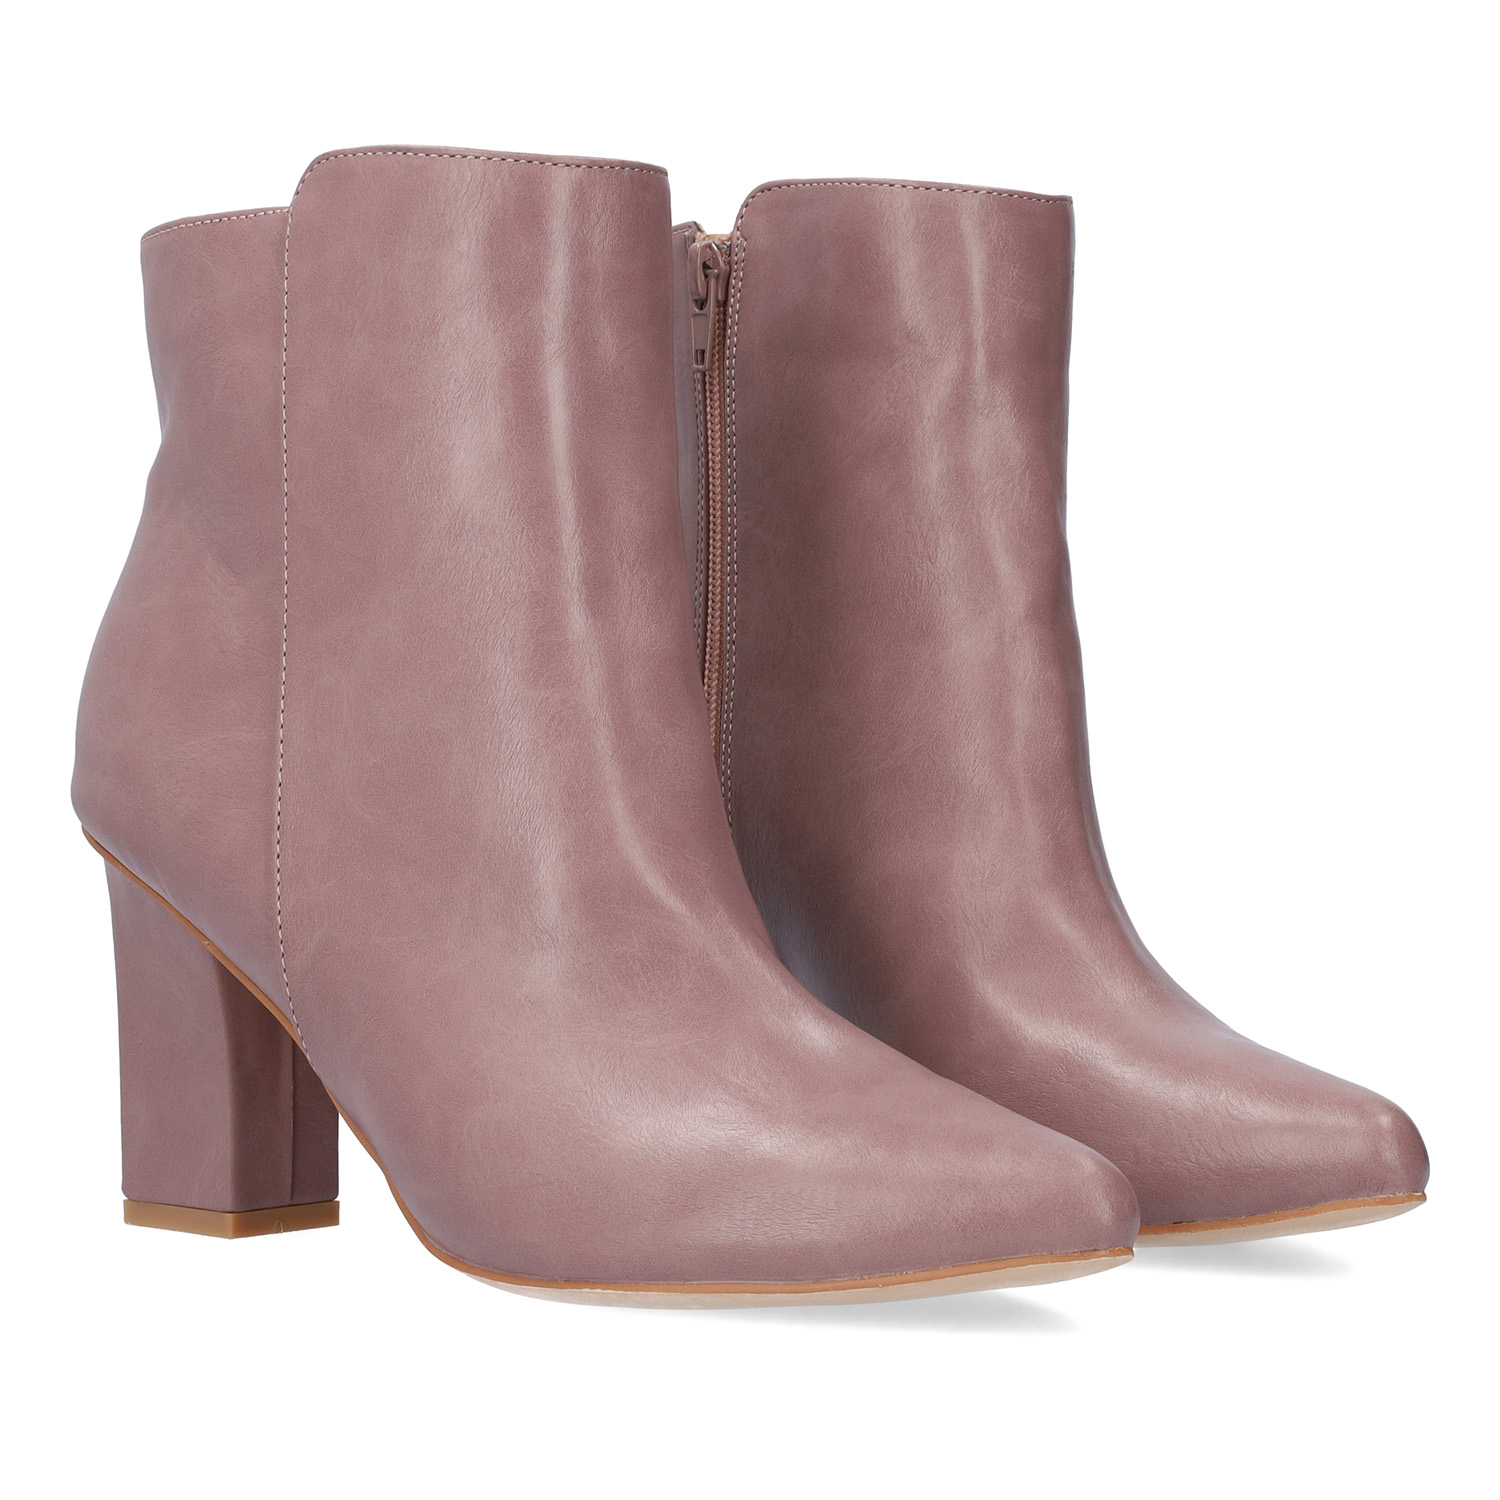 Heeled booties in mauve faux leather.